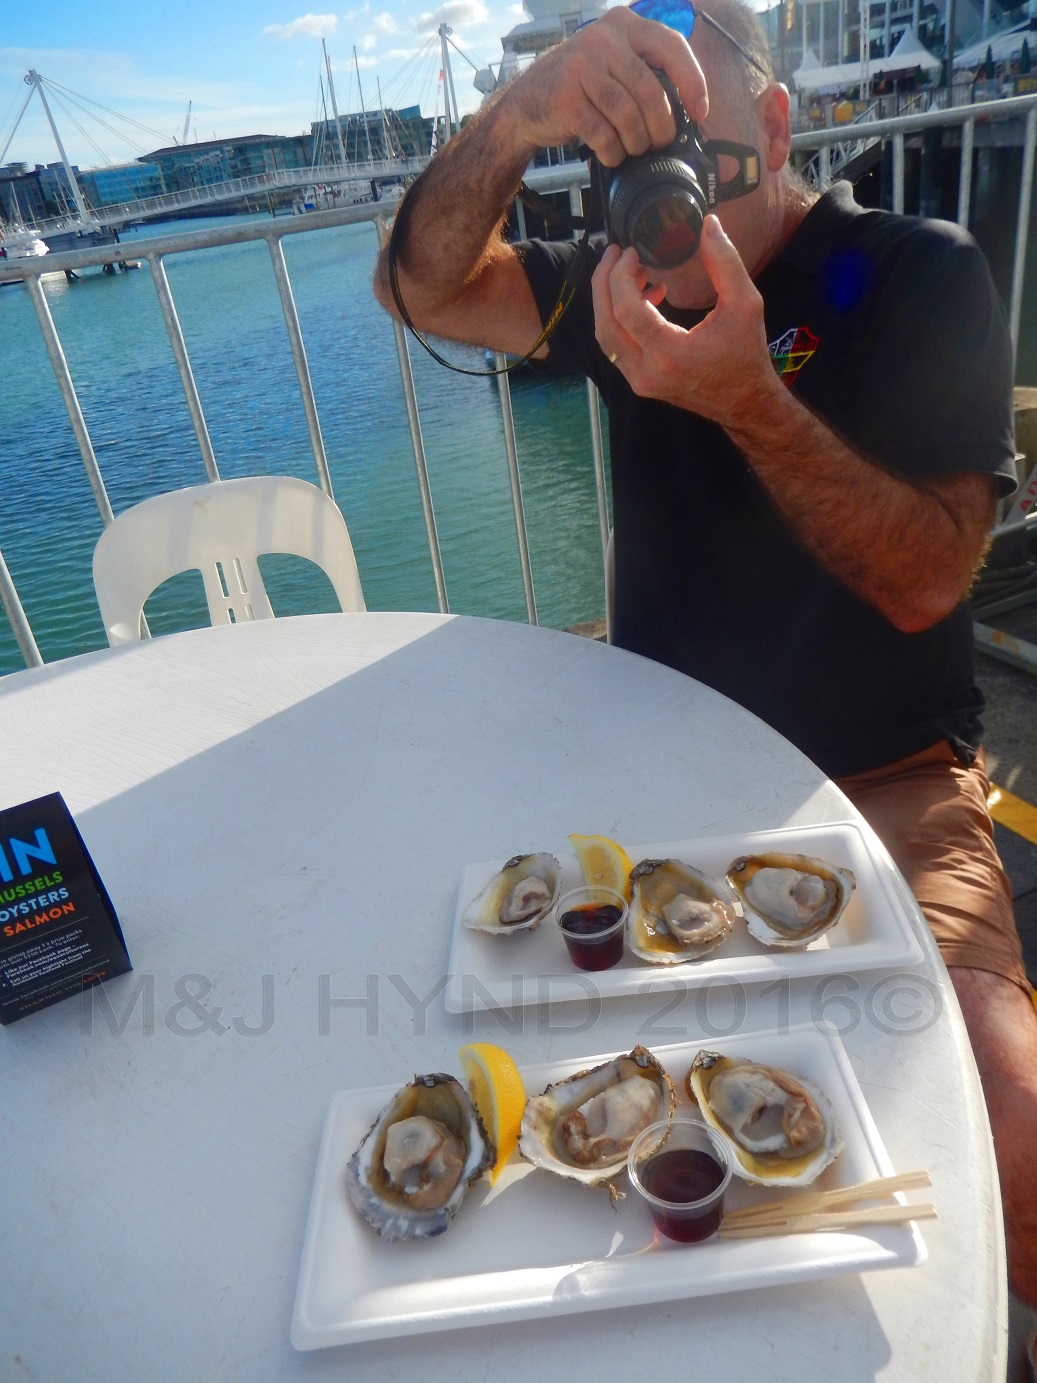 Oysters, Seafood Festival, Auckland, NZ